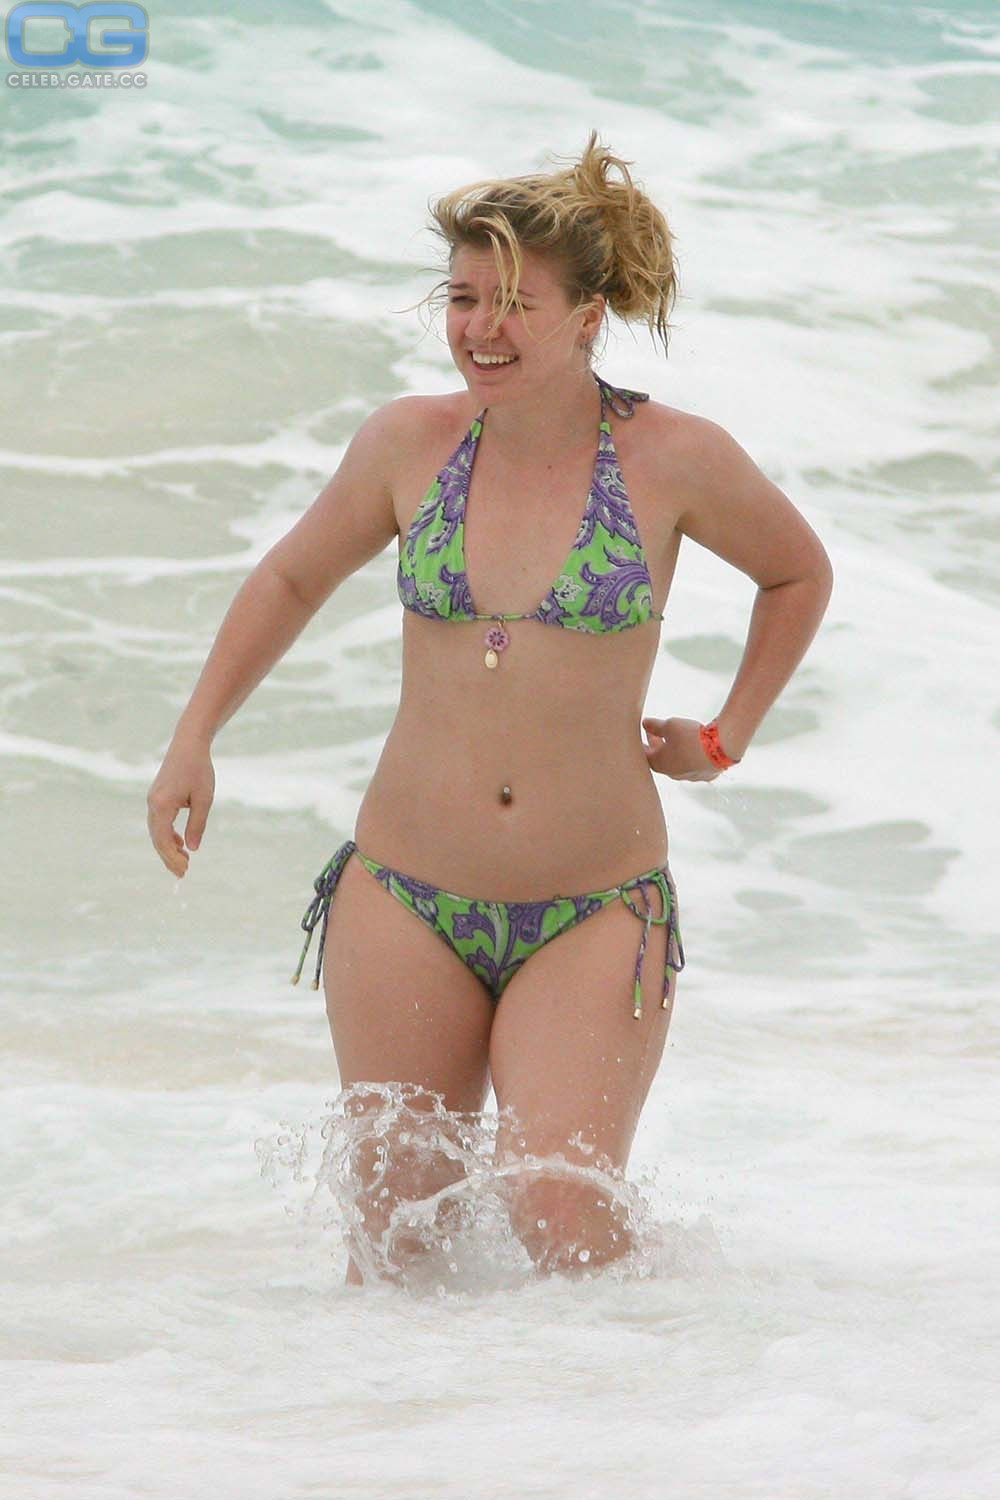 Kelly Clarkson - Kelly Clarkson nude, pictures, photos, Playboy, naked, topless, fappening